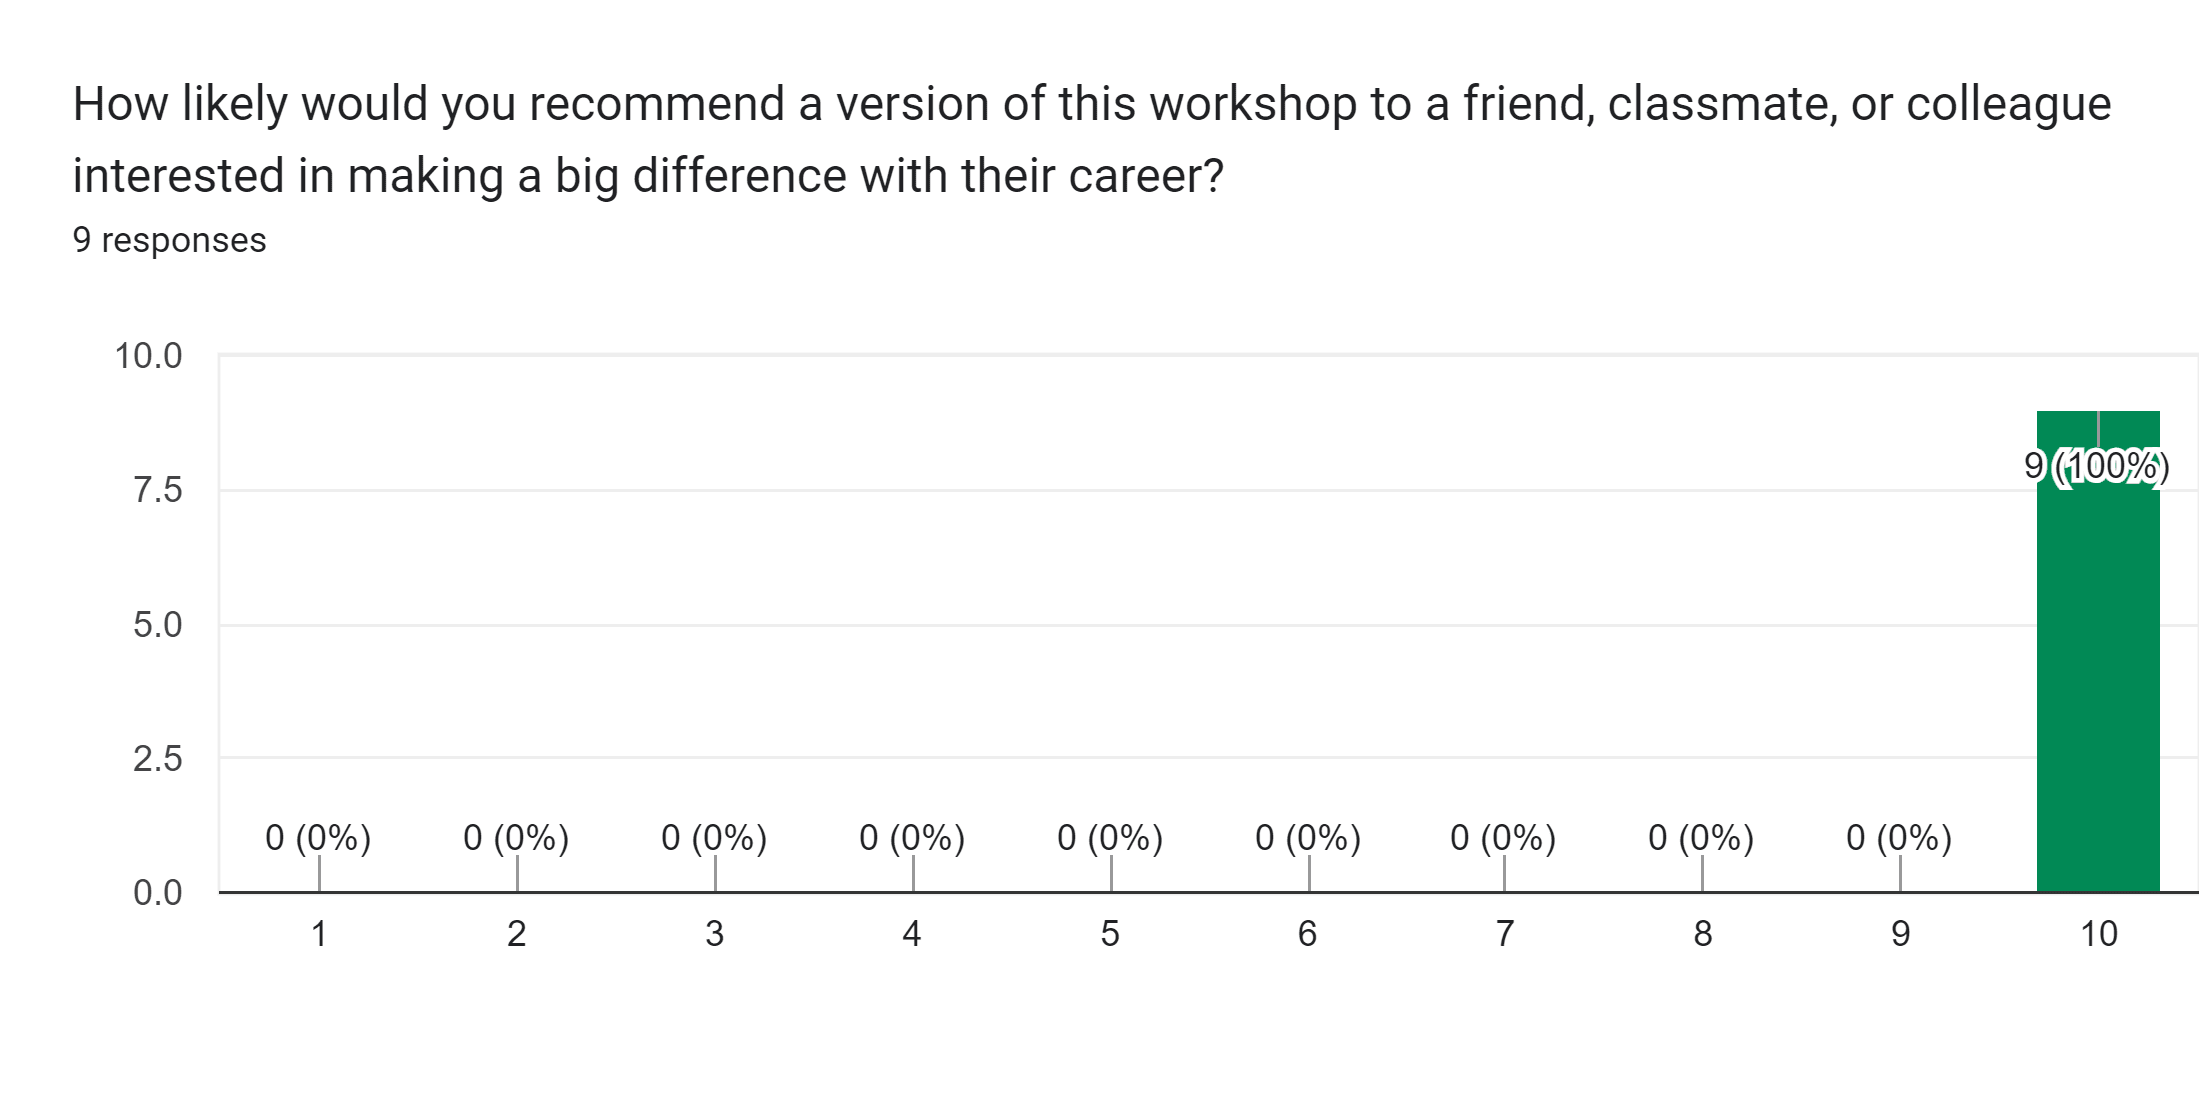 Forms response chart. Question title: How likely would you recommend a version of this workshop to a friend, classmate, or colleague interested in making a big difference with their career?. Number of responses: 9 responses.